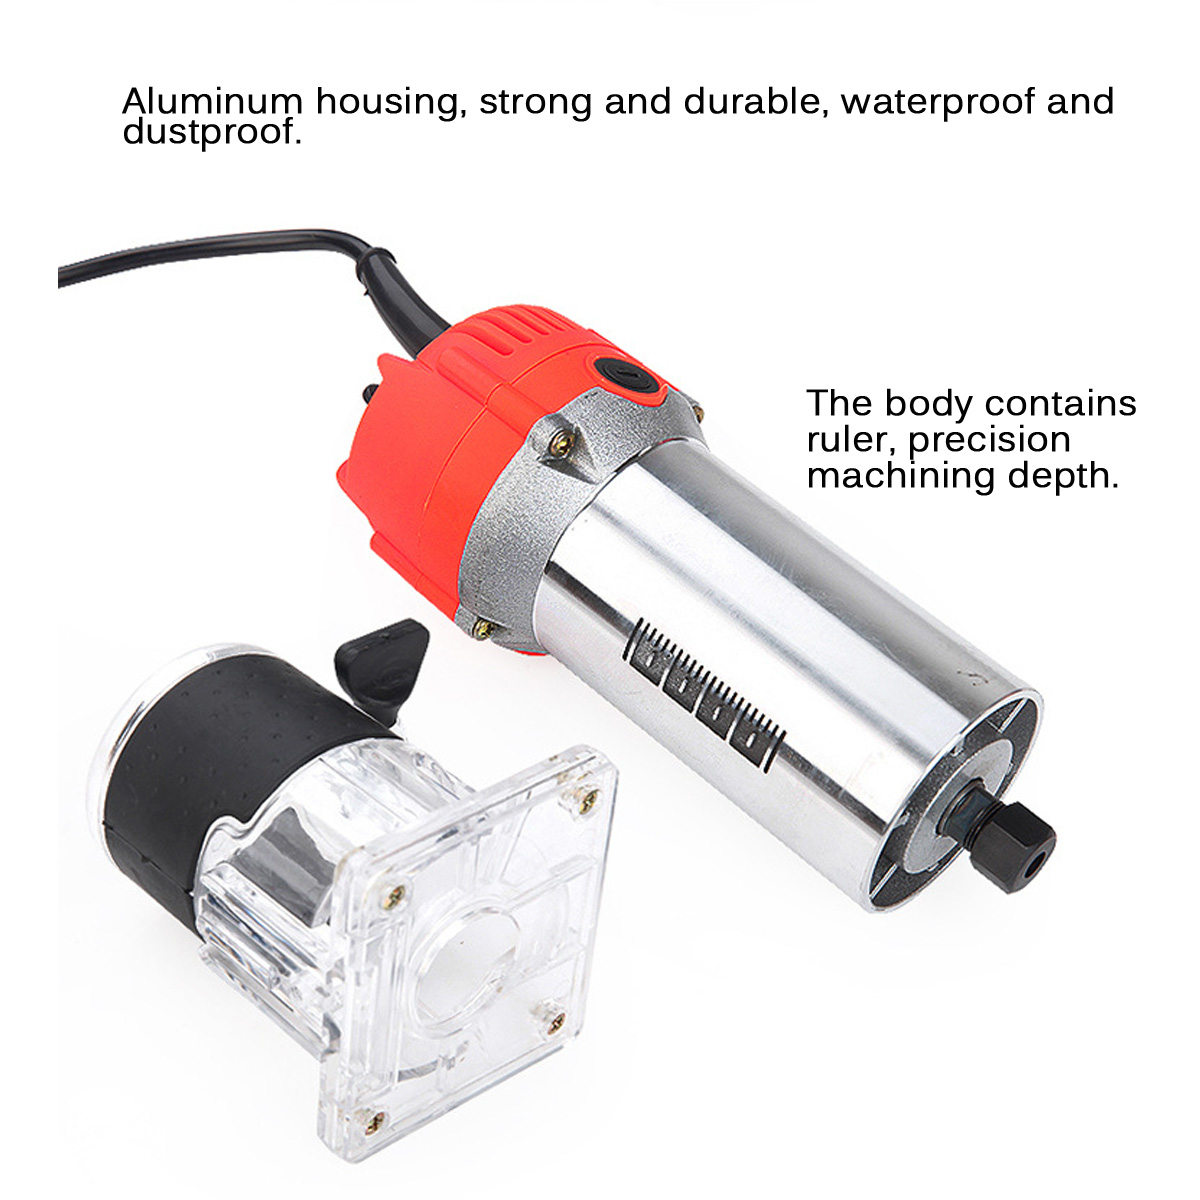 1100W-Electric-Hand-Trimmer-Palm-Router-Wood-Laminate-Joiner-Tool-Variable-Speed-1808421-7